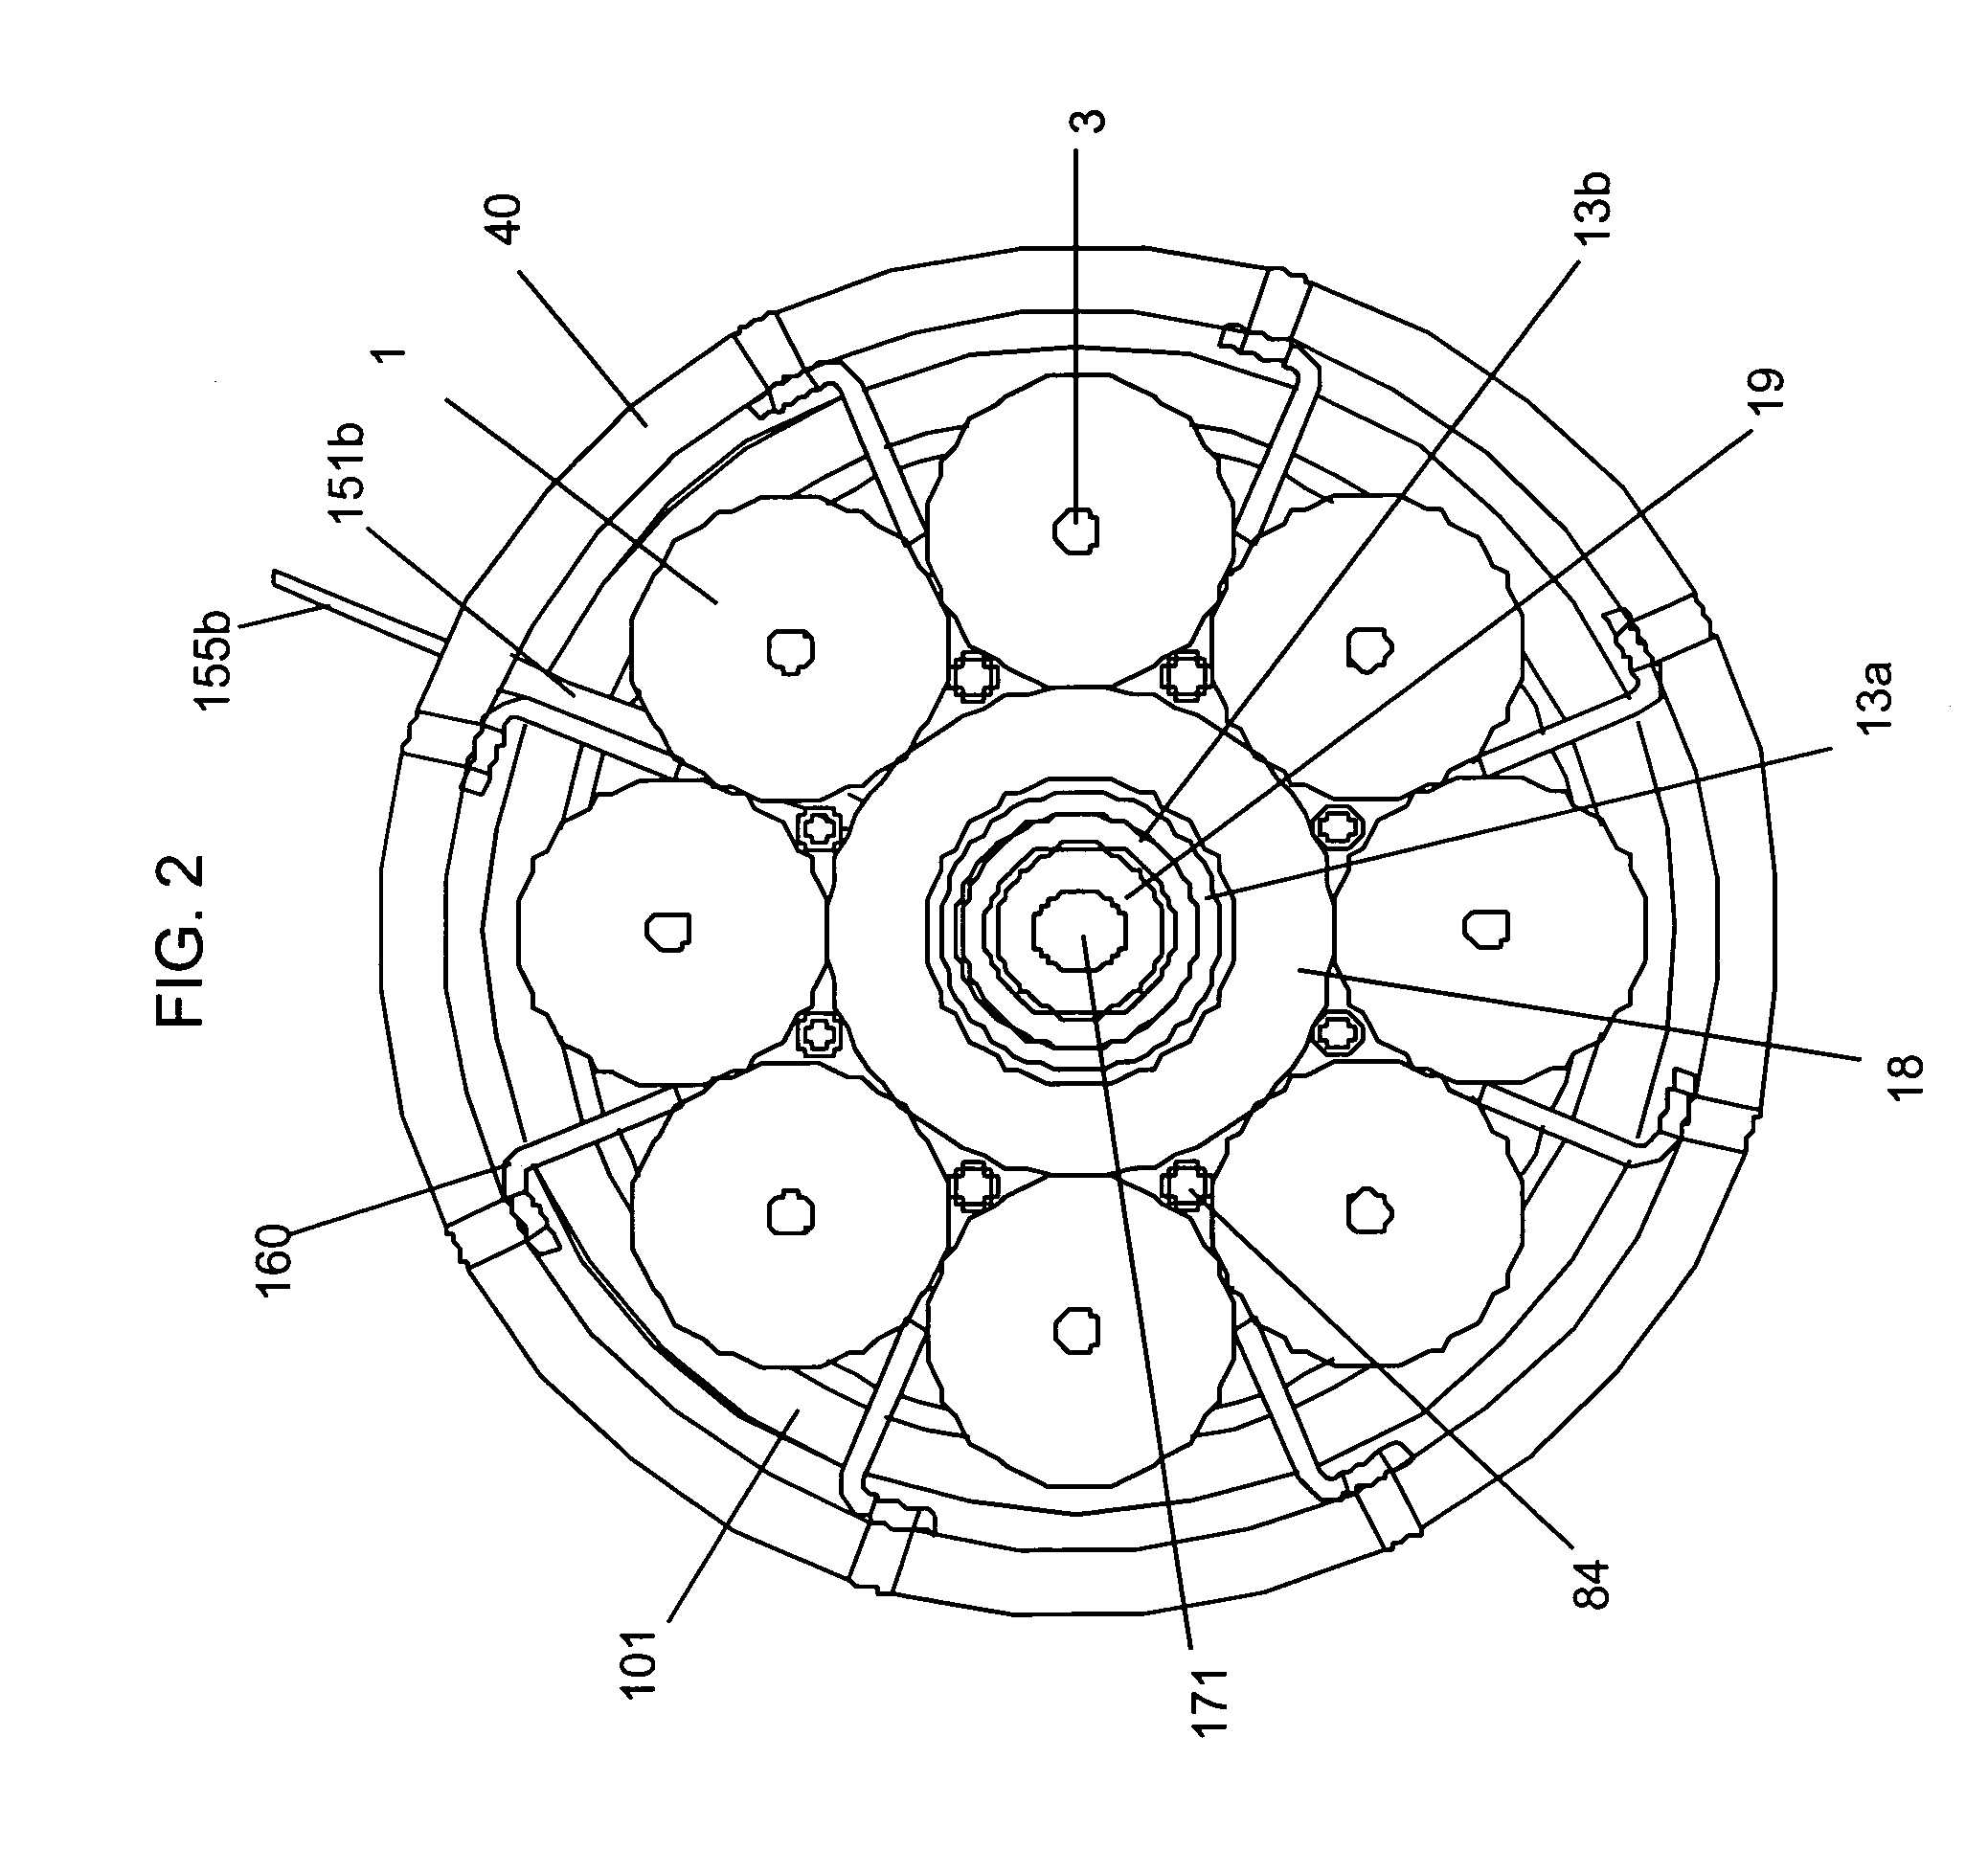 Continuously variable planetary gear set